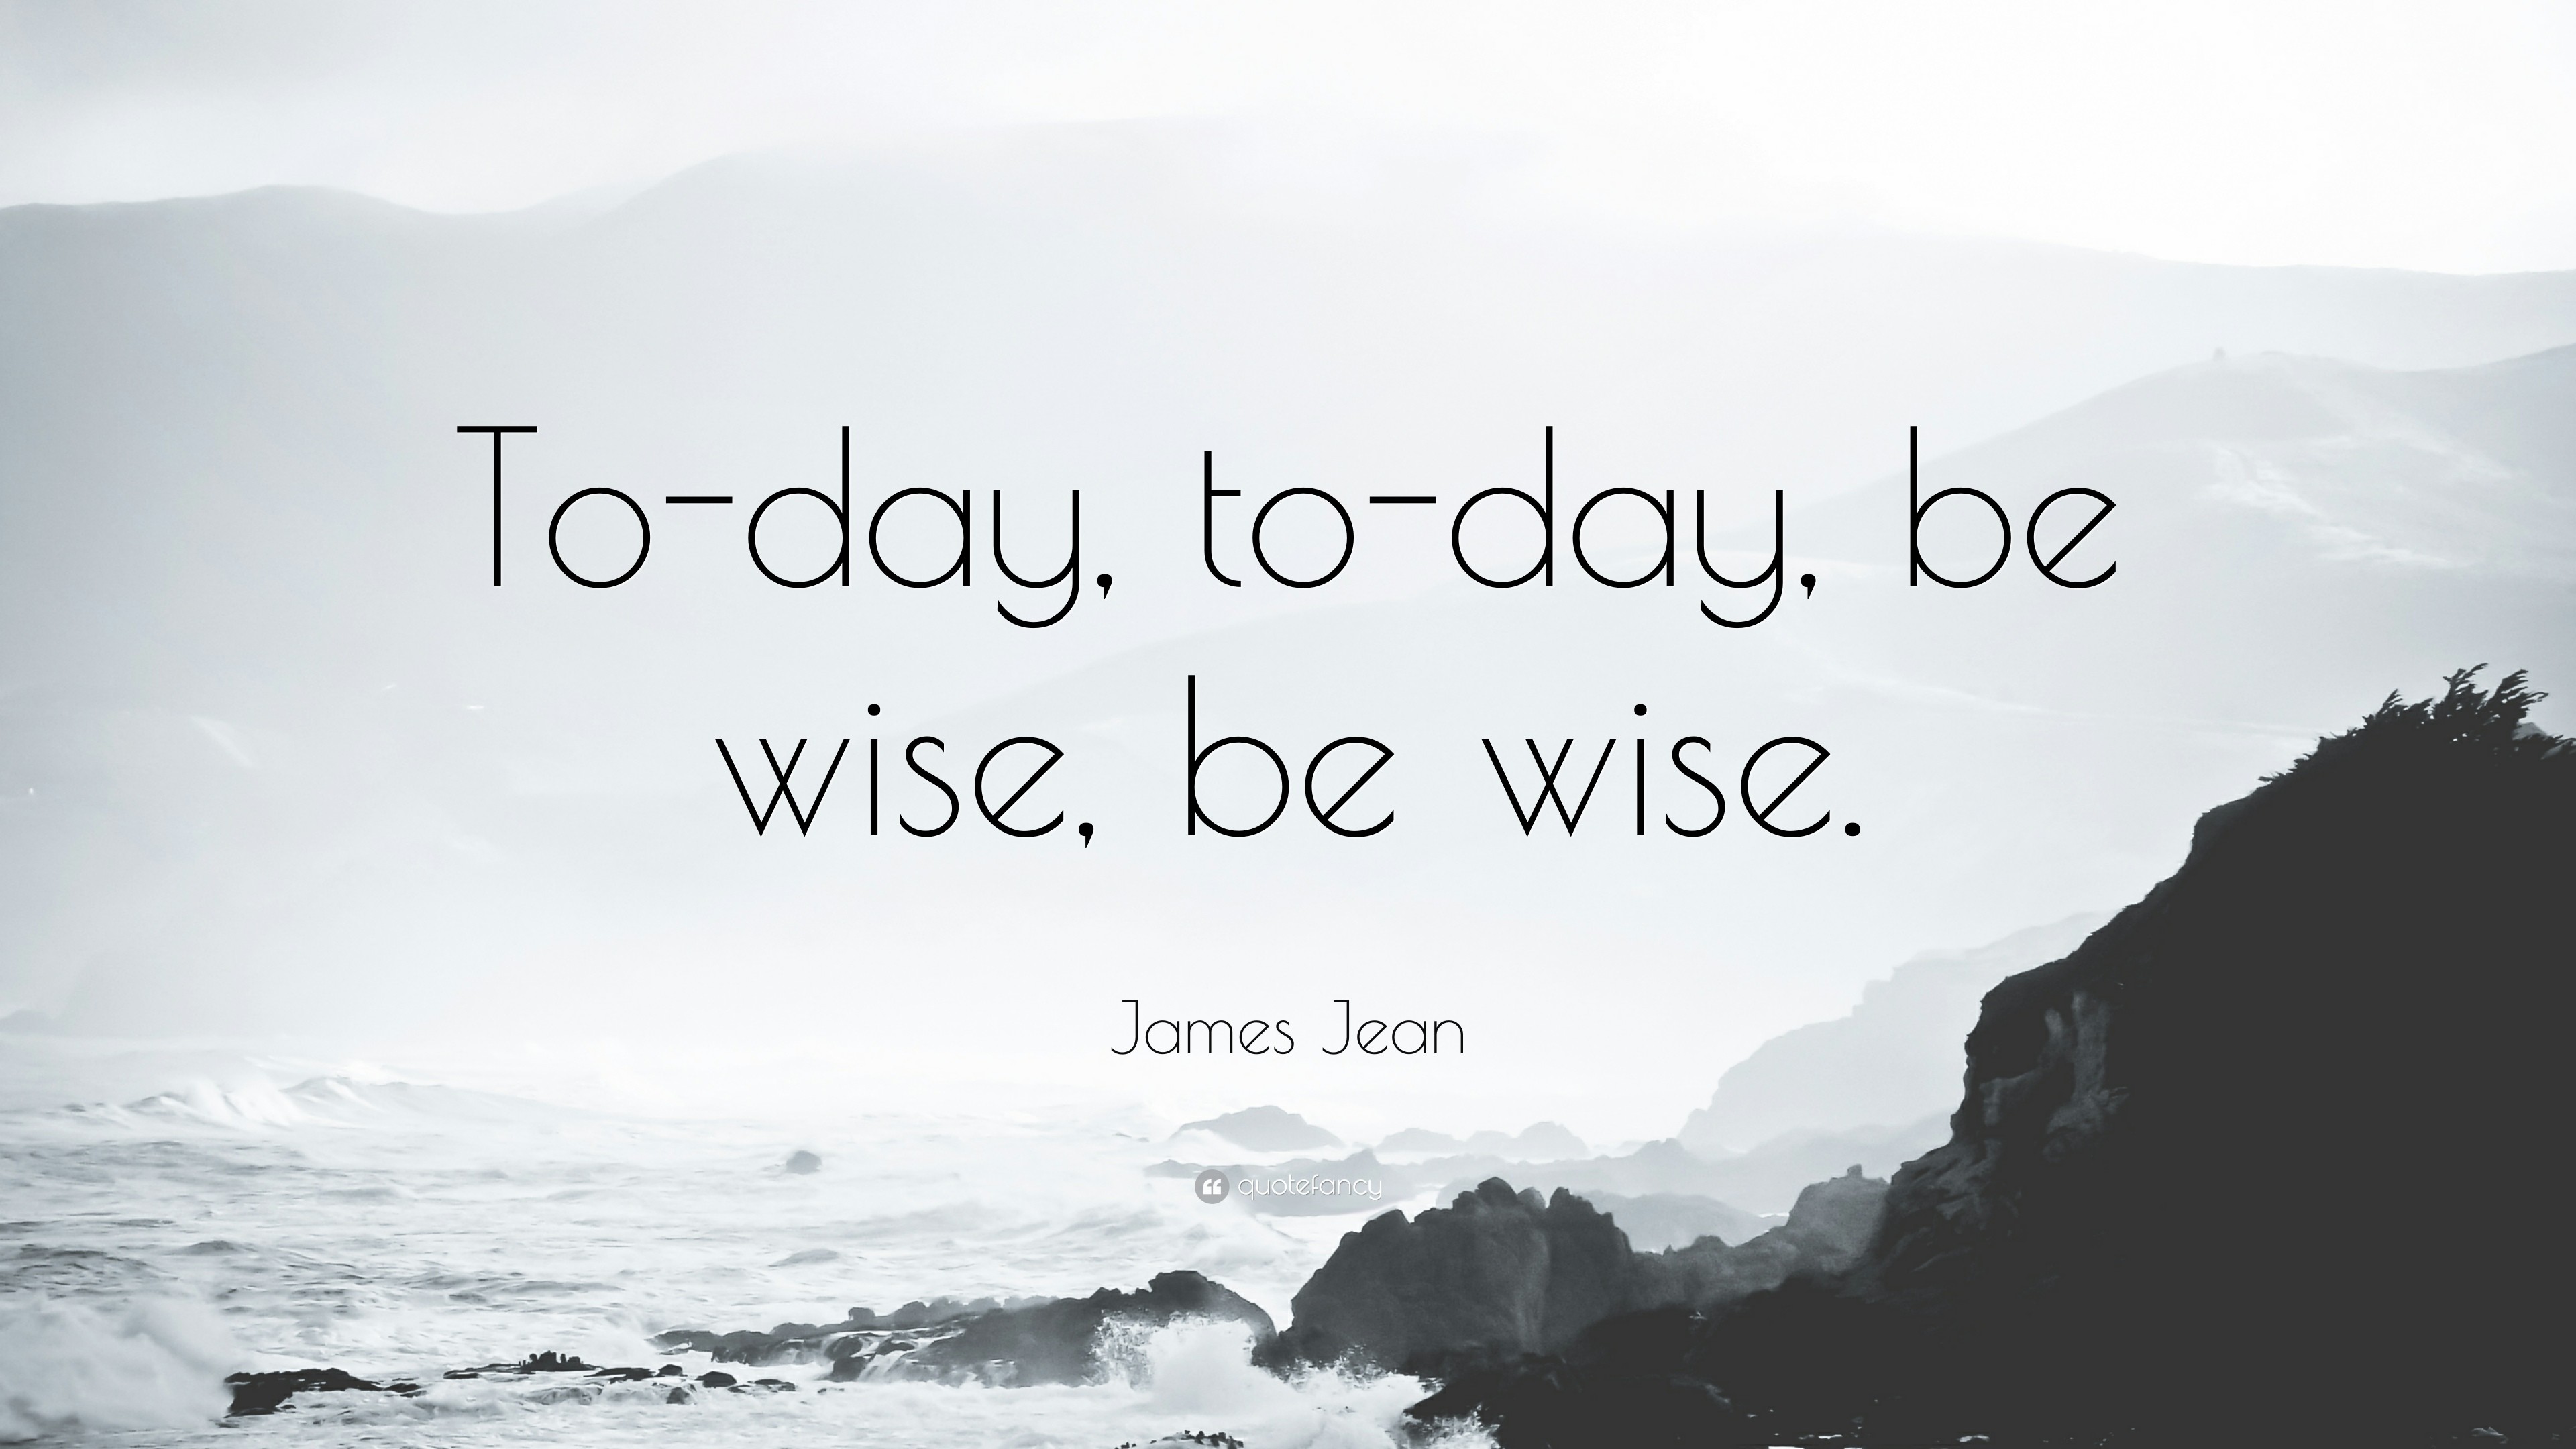 3840x2160 James Jean Quote: “To-day, to-day, be wise,